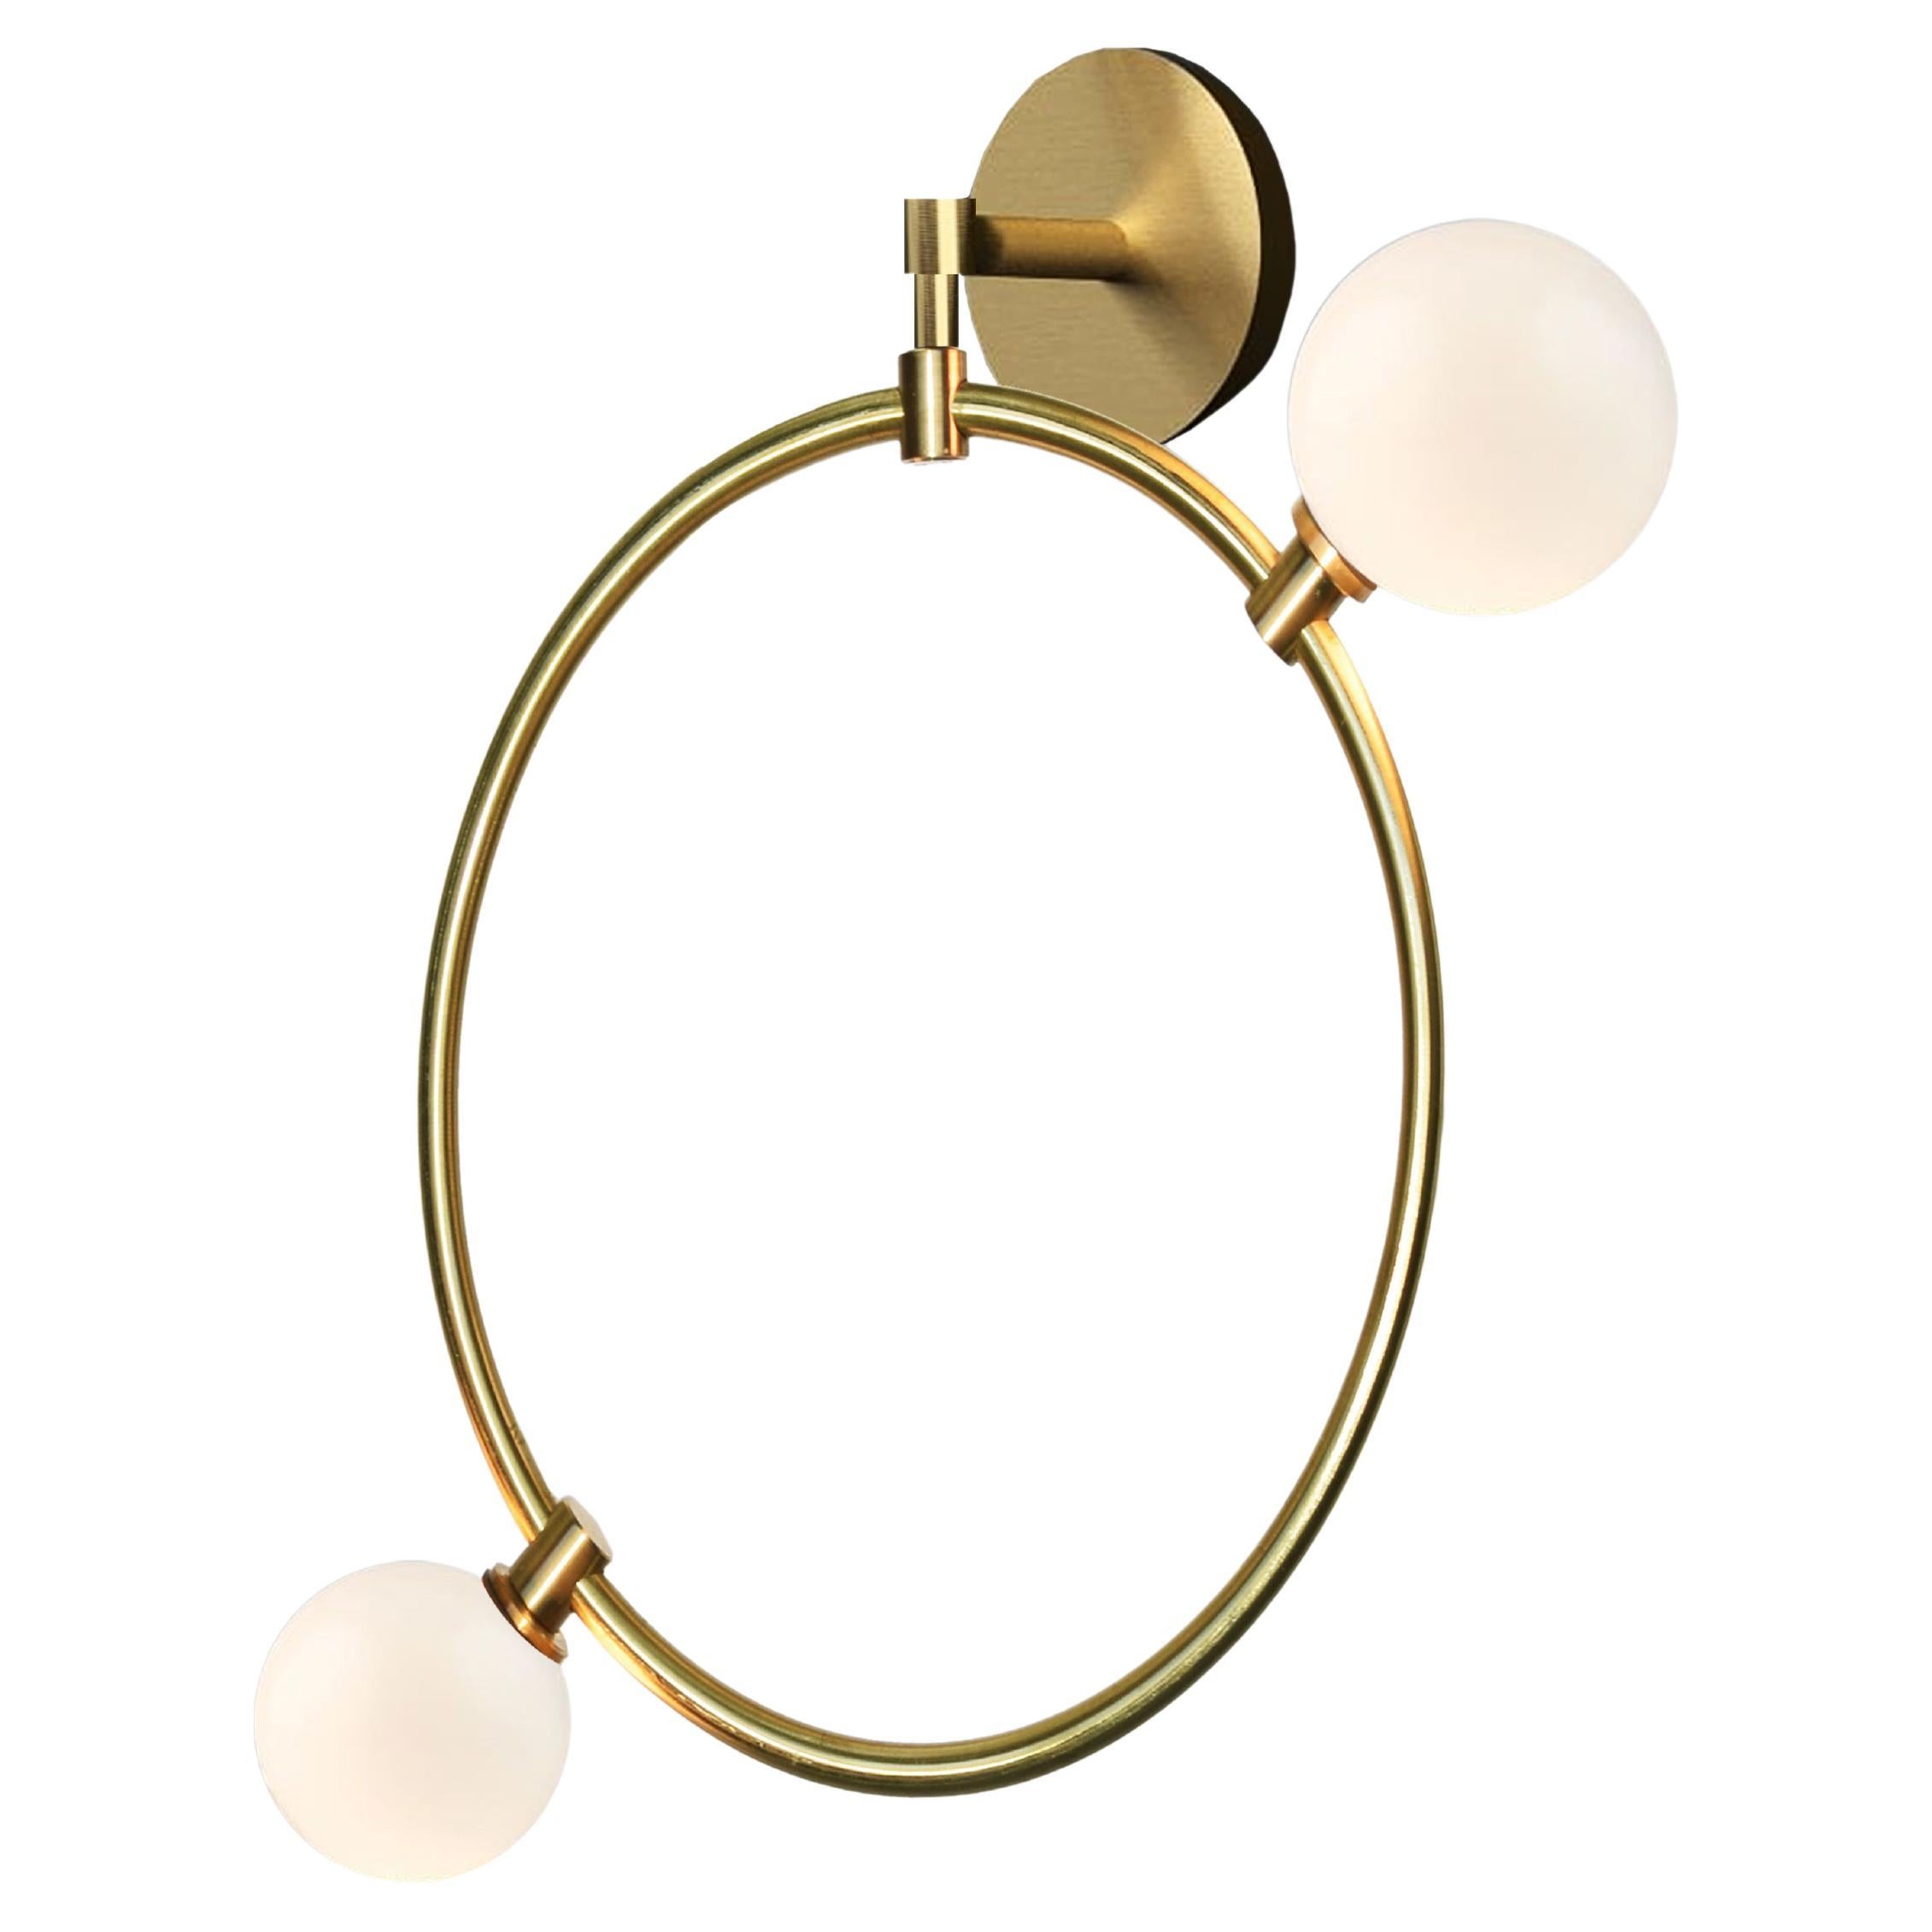 'Drops Wall - Medium' by Marc Wood. Handmade Brass Ring Lamp, Opal Glass Shades For Sale